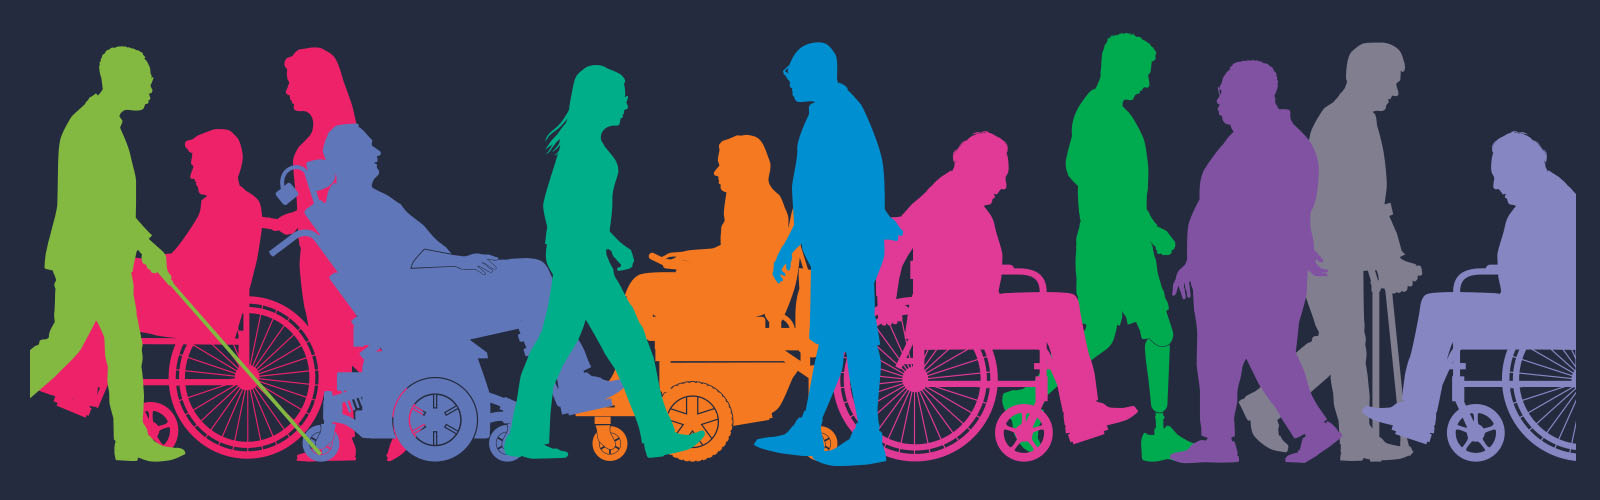 Graphic displaying people with various disabilities